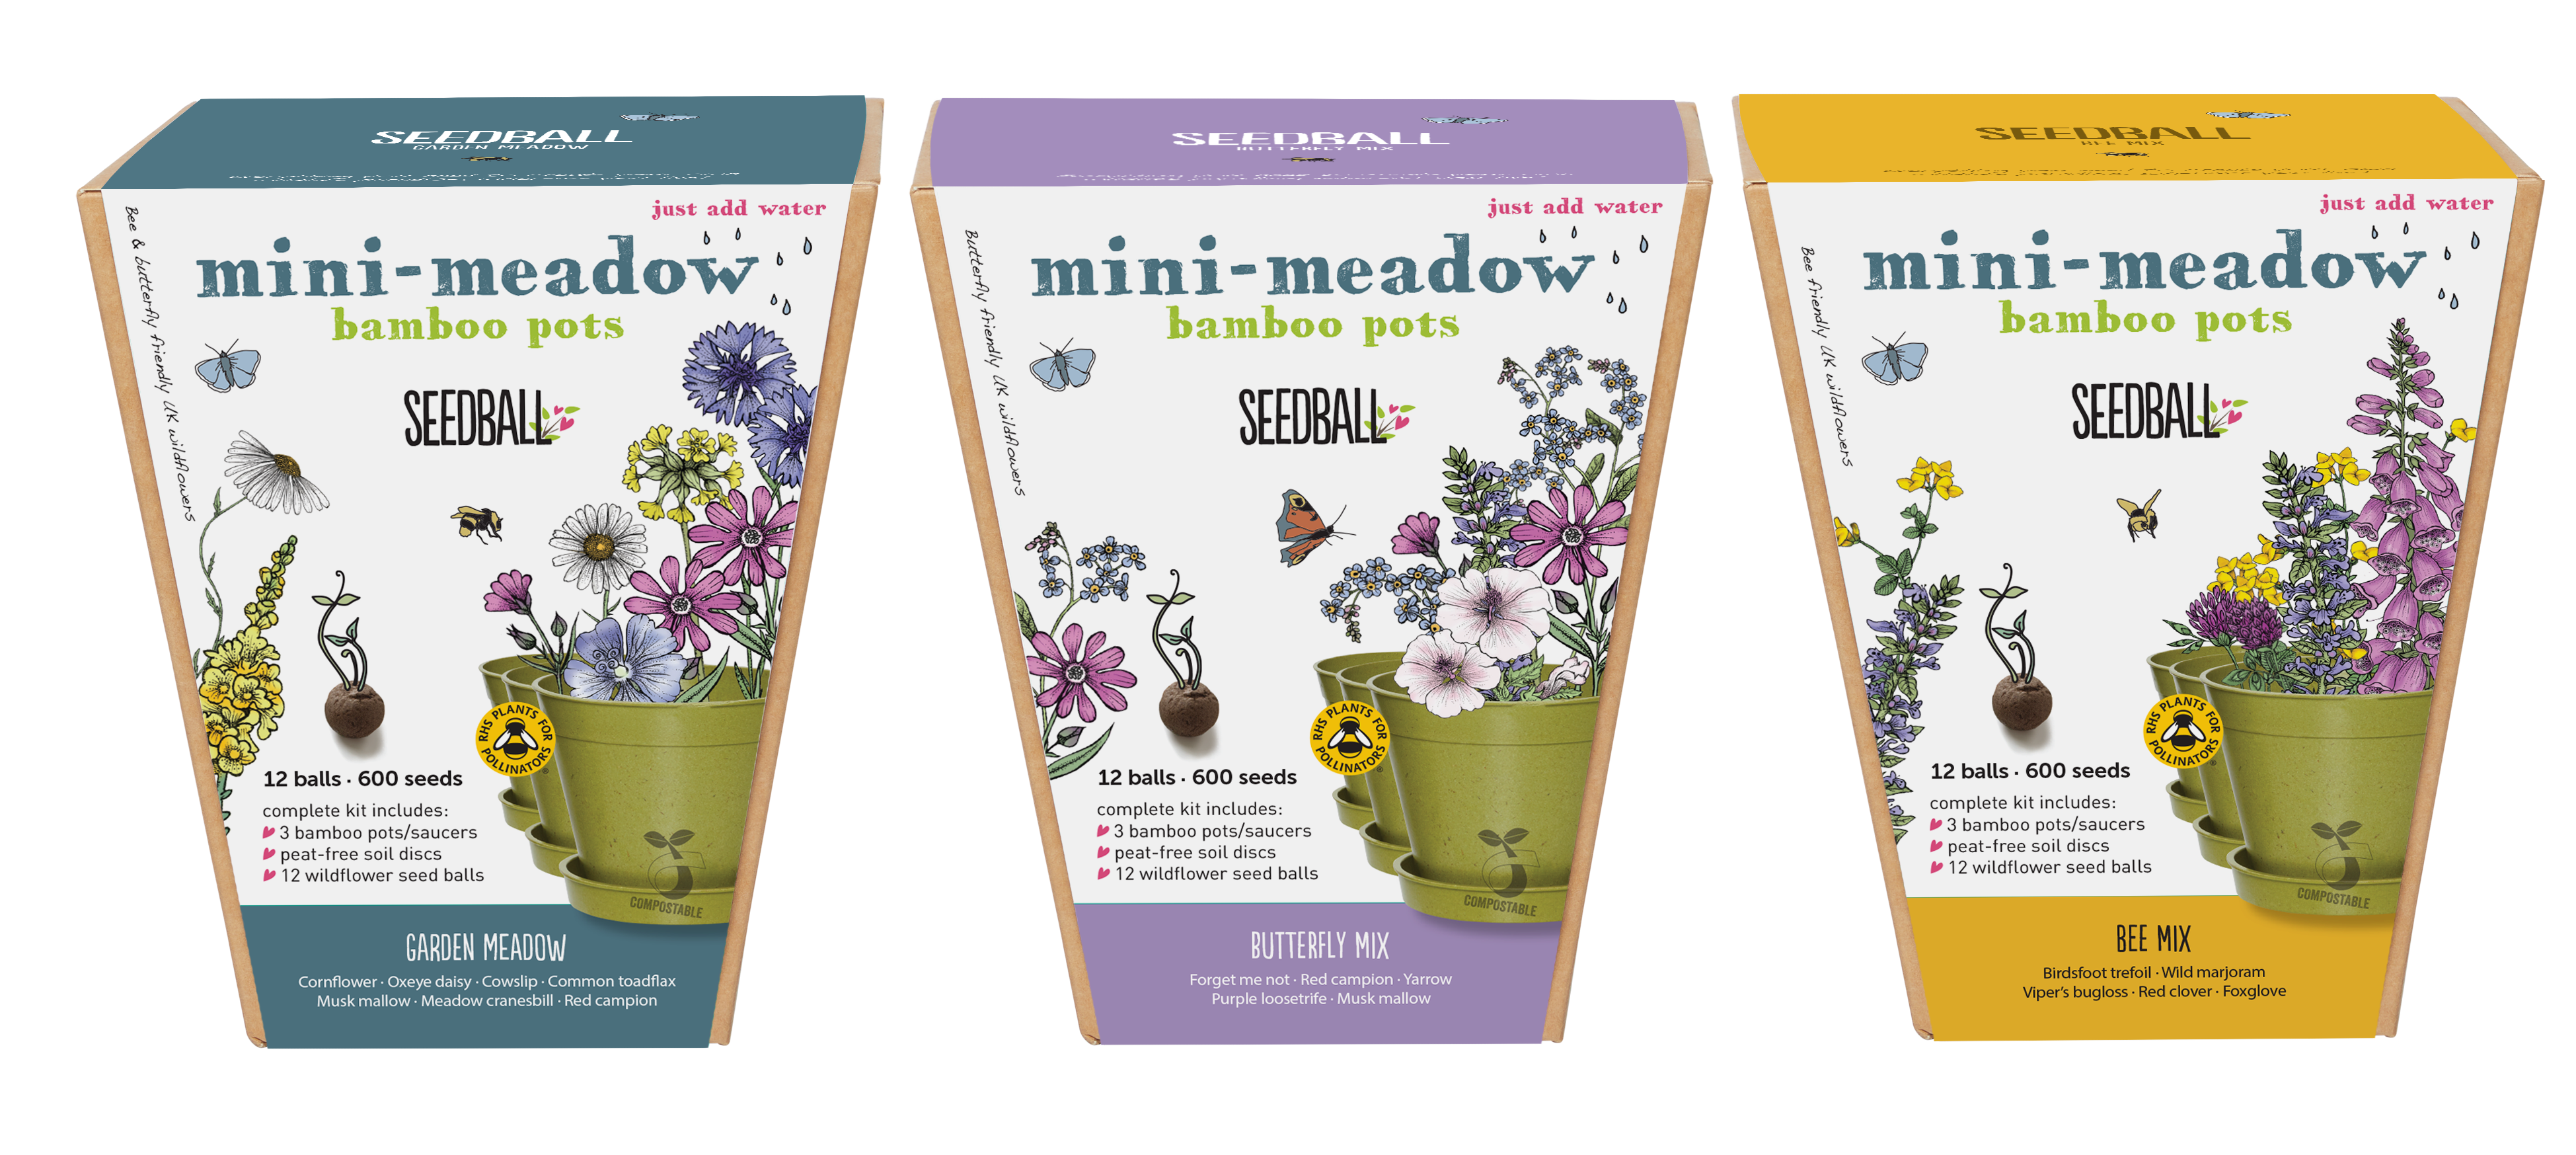 Mini-Meadow Bamboo Pots. Gift Of The Year Finalist 2021!